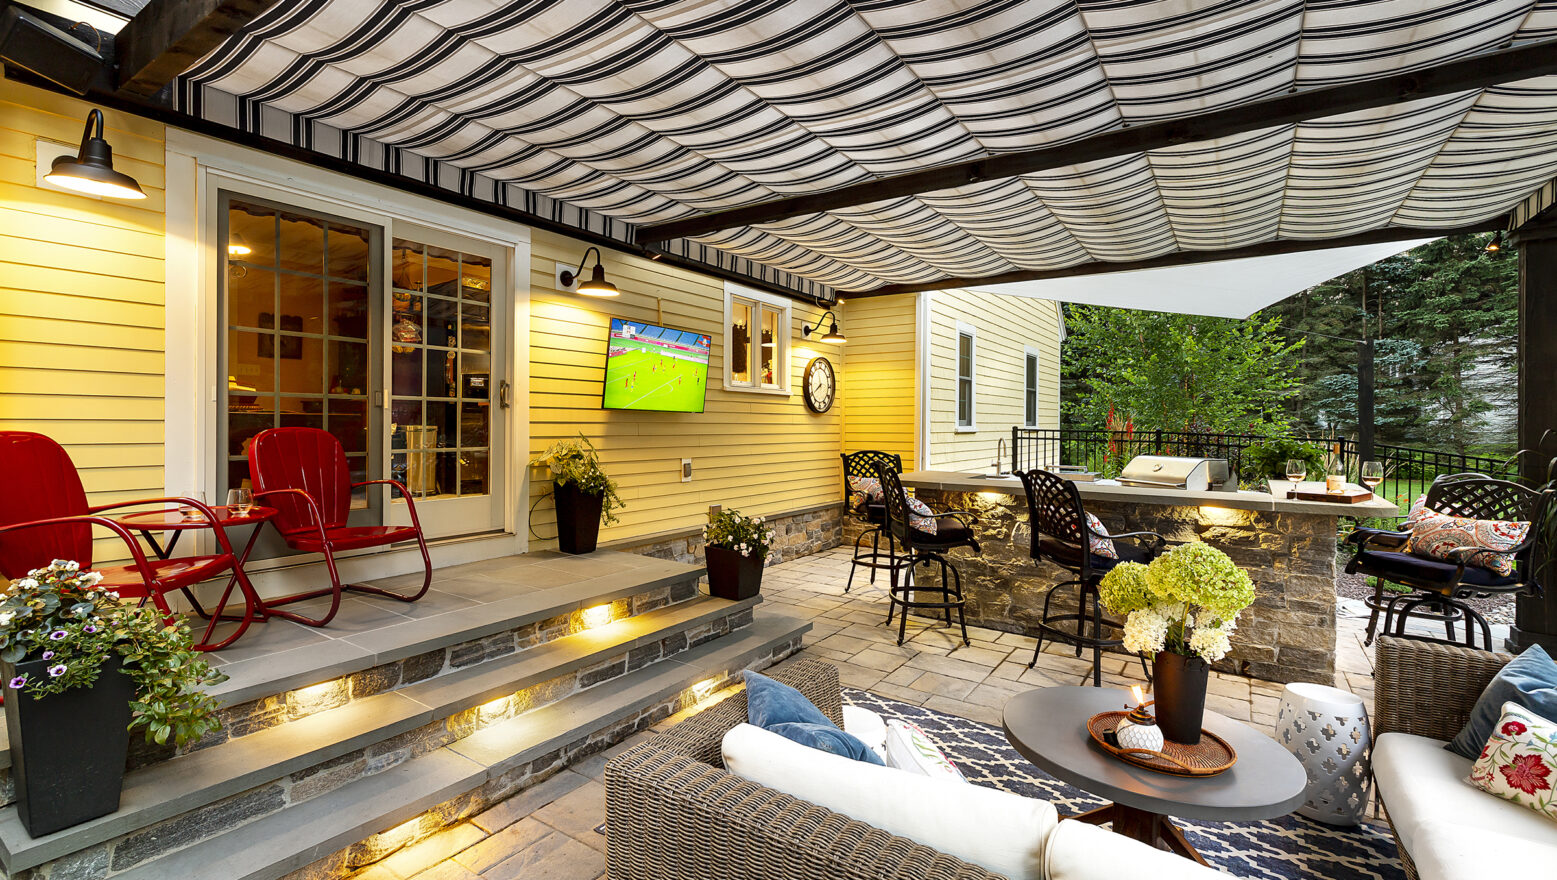 Covered patio with couch and outdoor kitchen